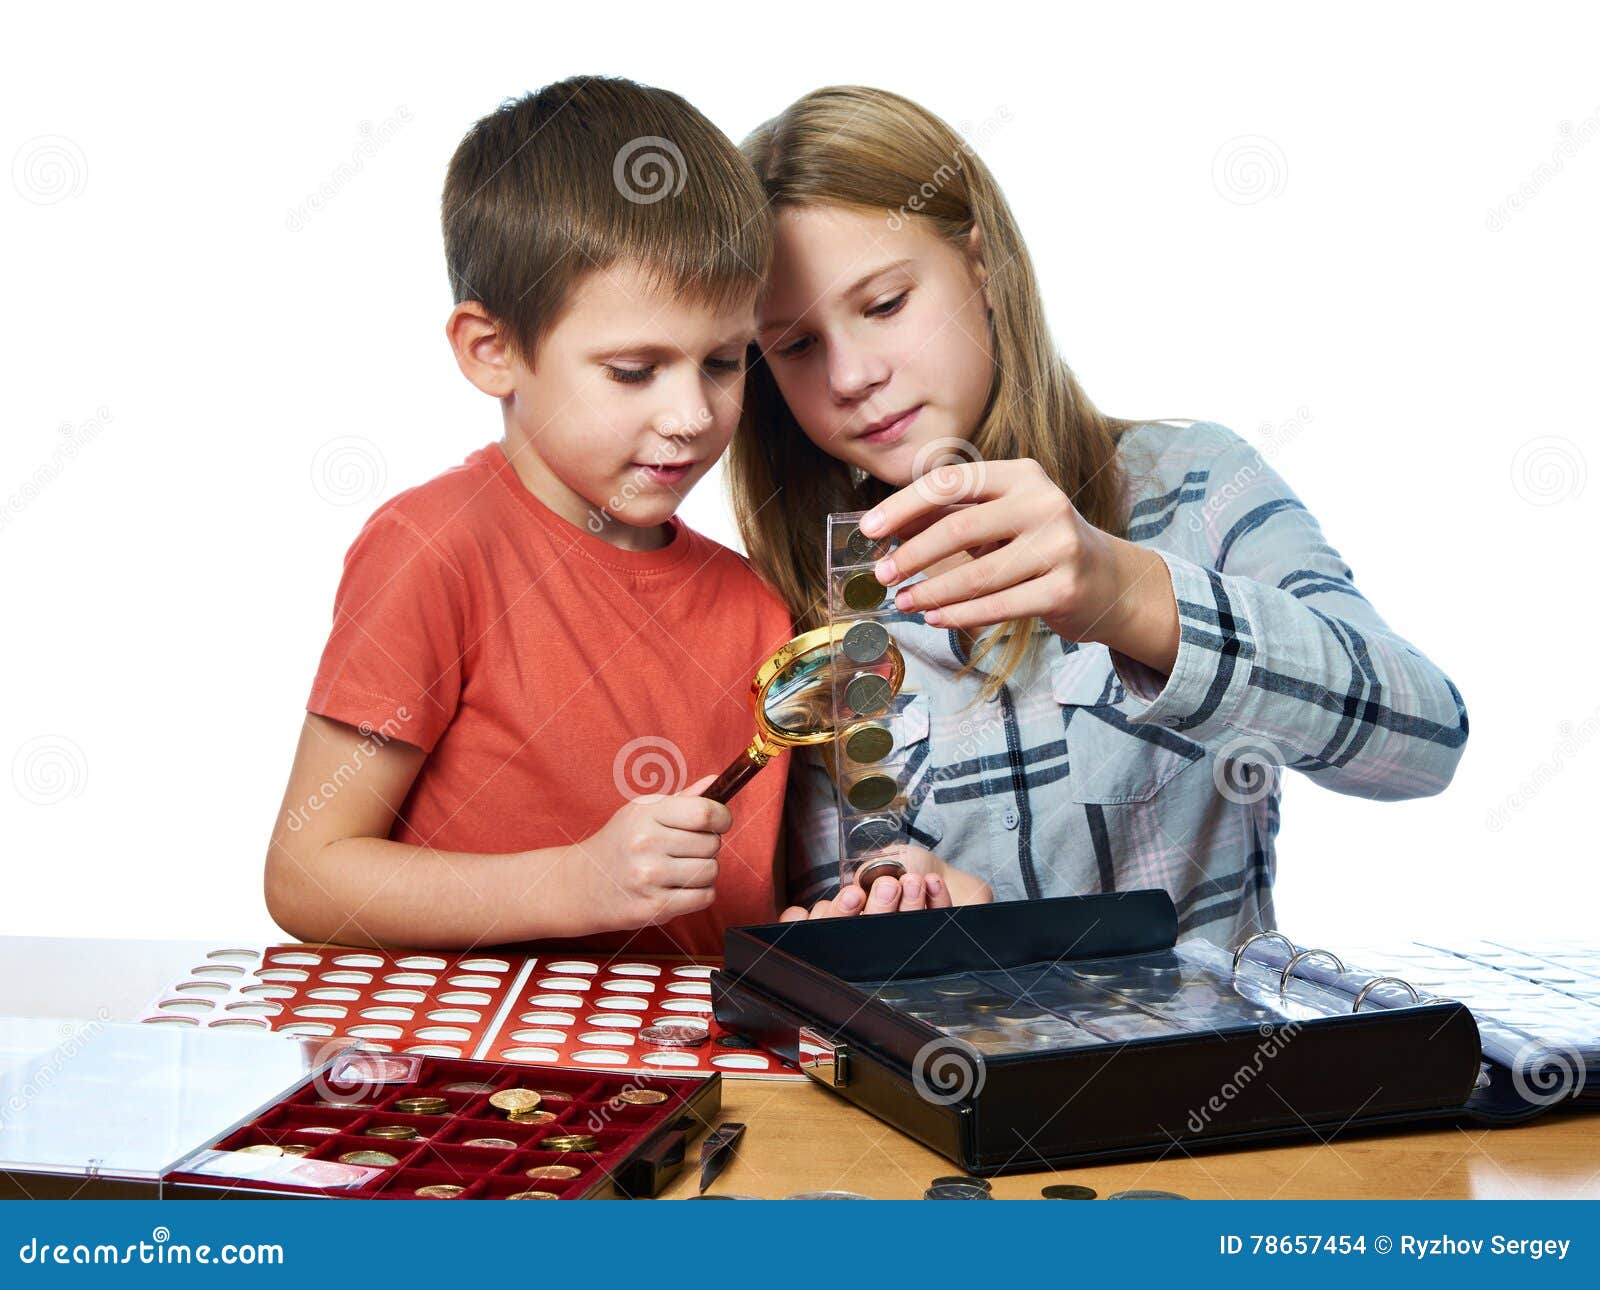 boy and girl are considering coin collection 